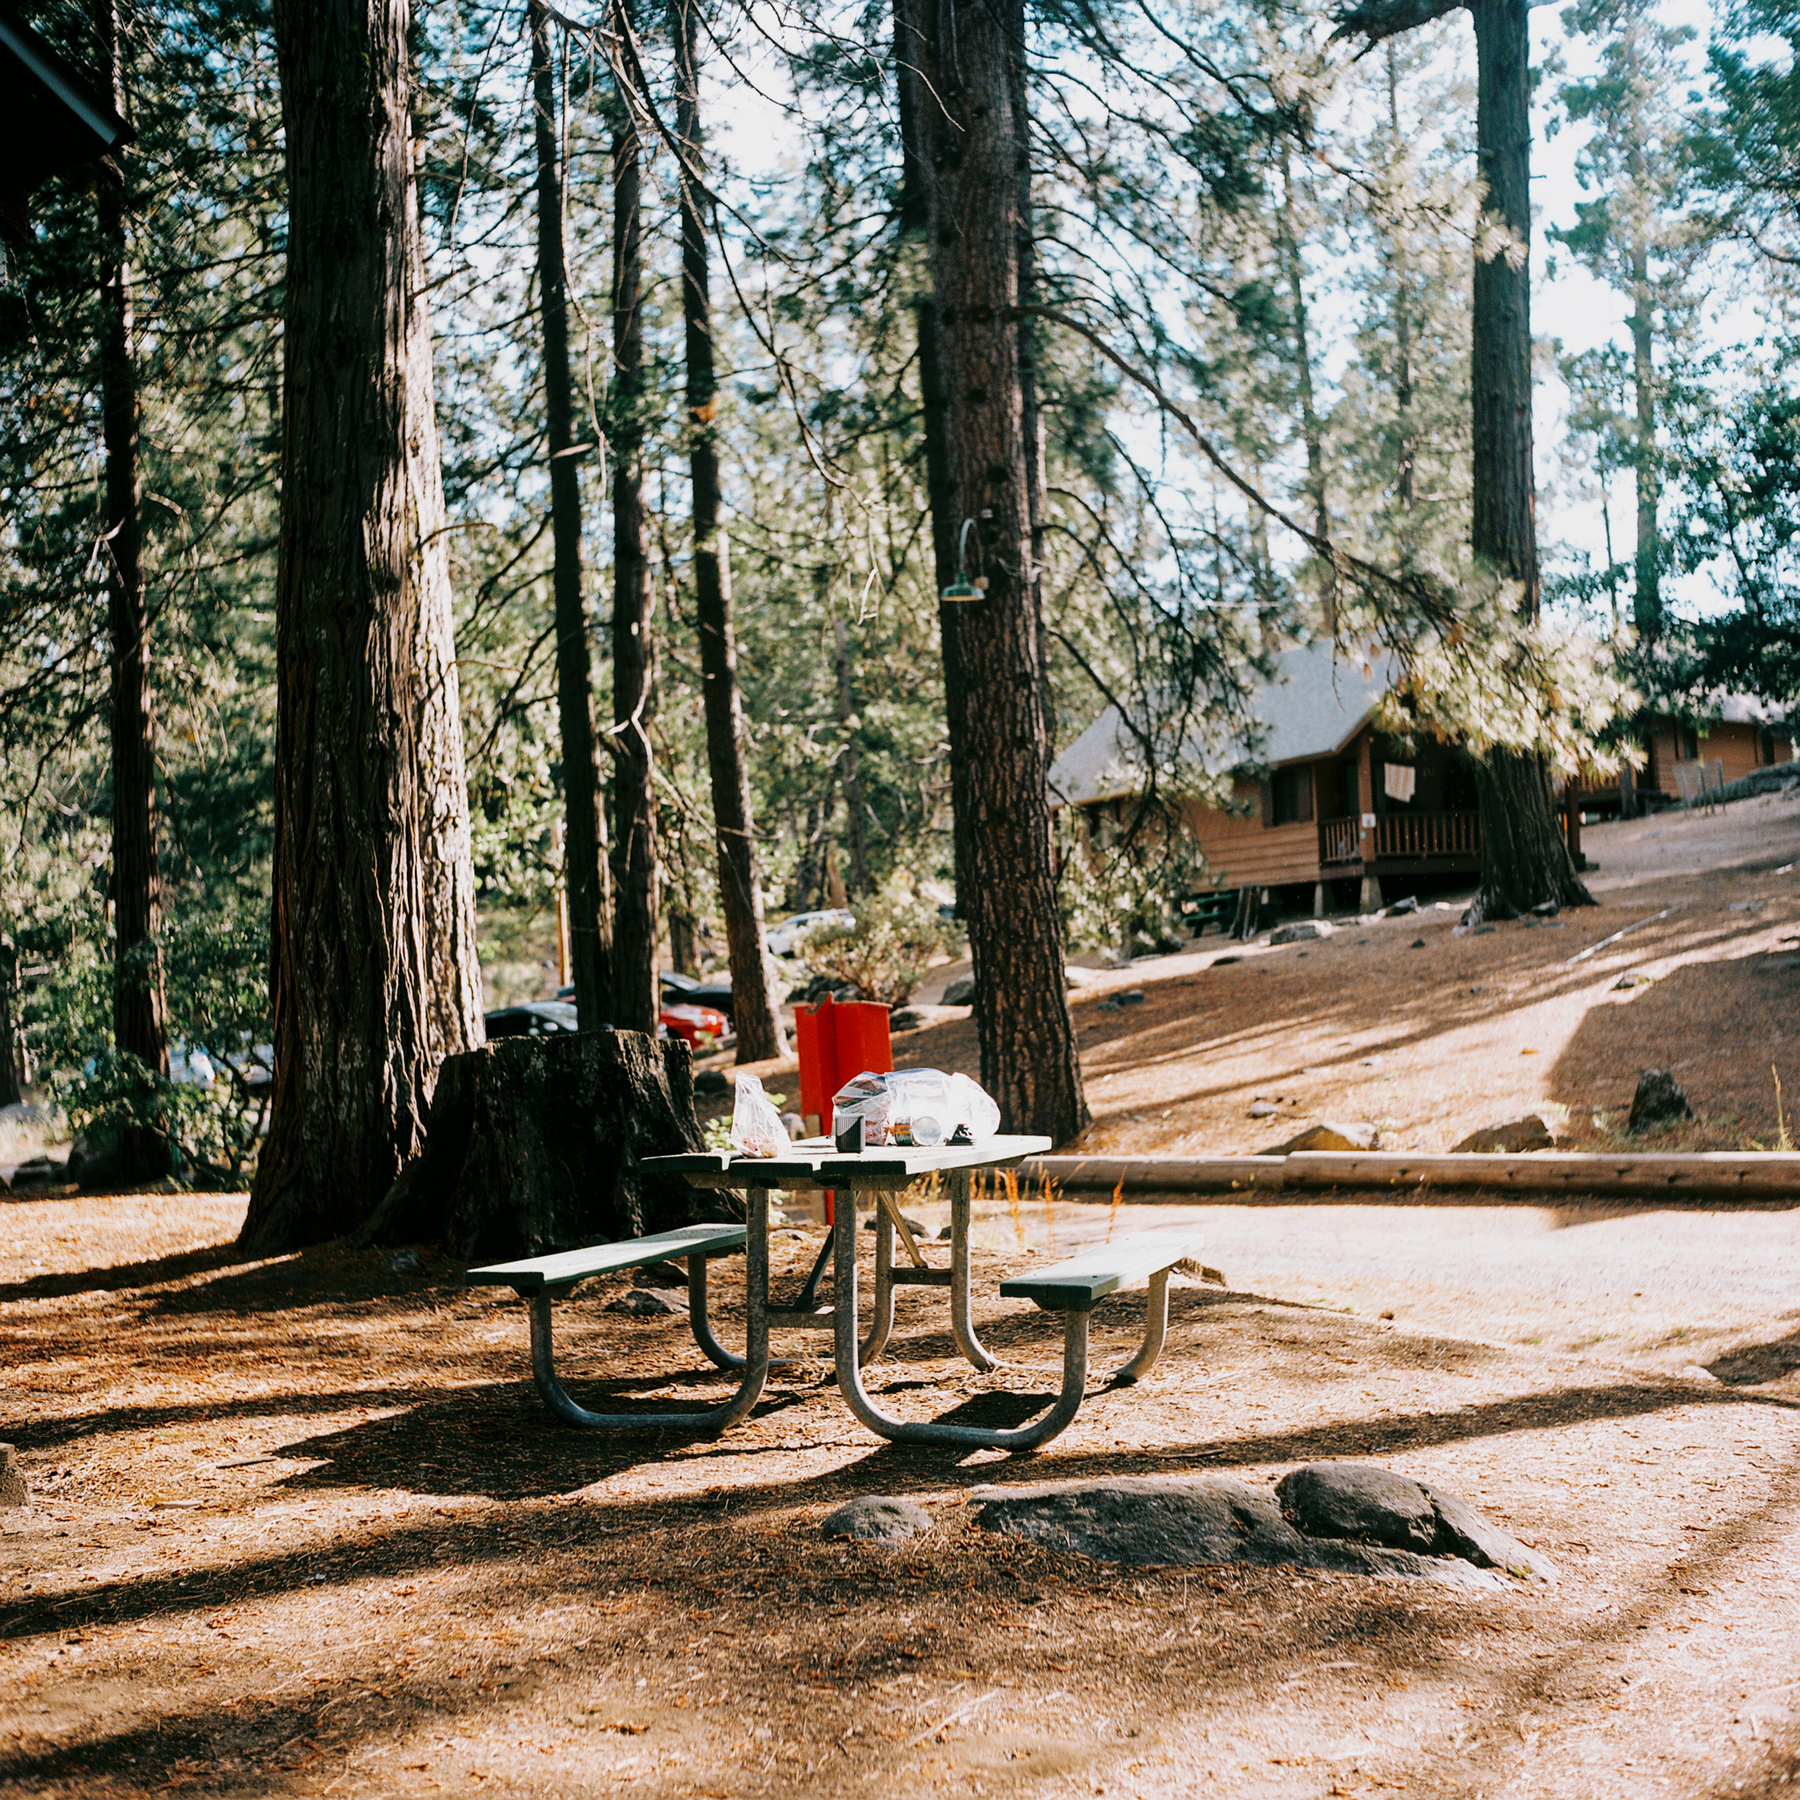 a scan of a color negative of a medium format photo. photo is of a bench set among some trees and cabins